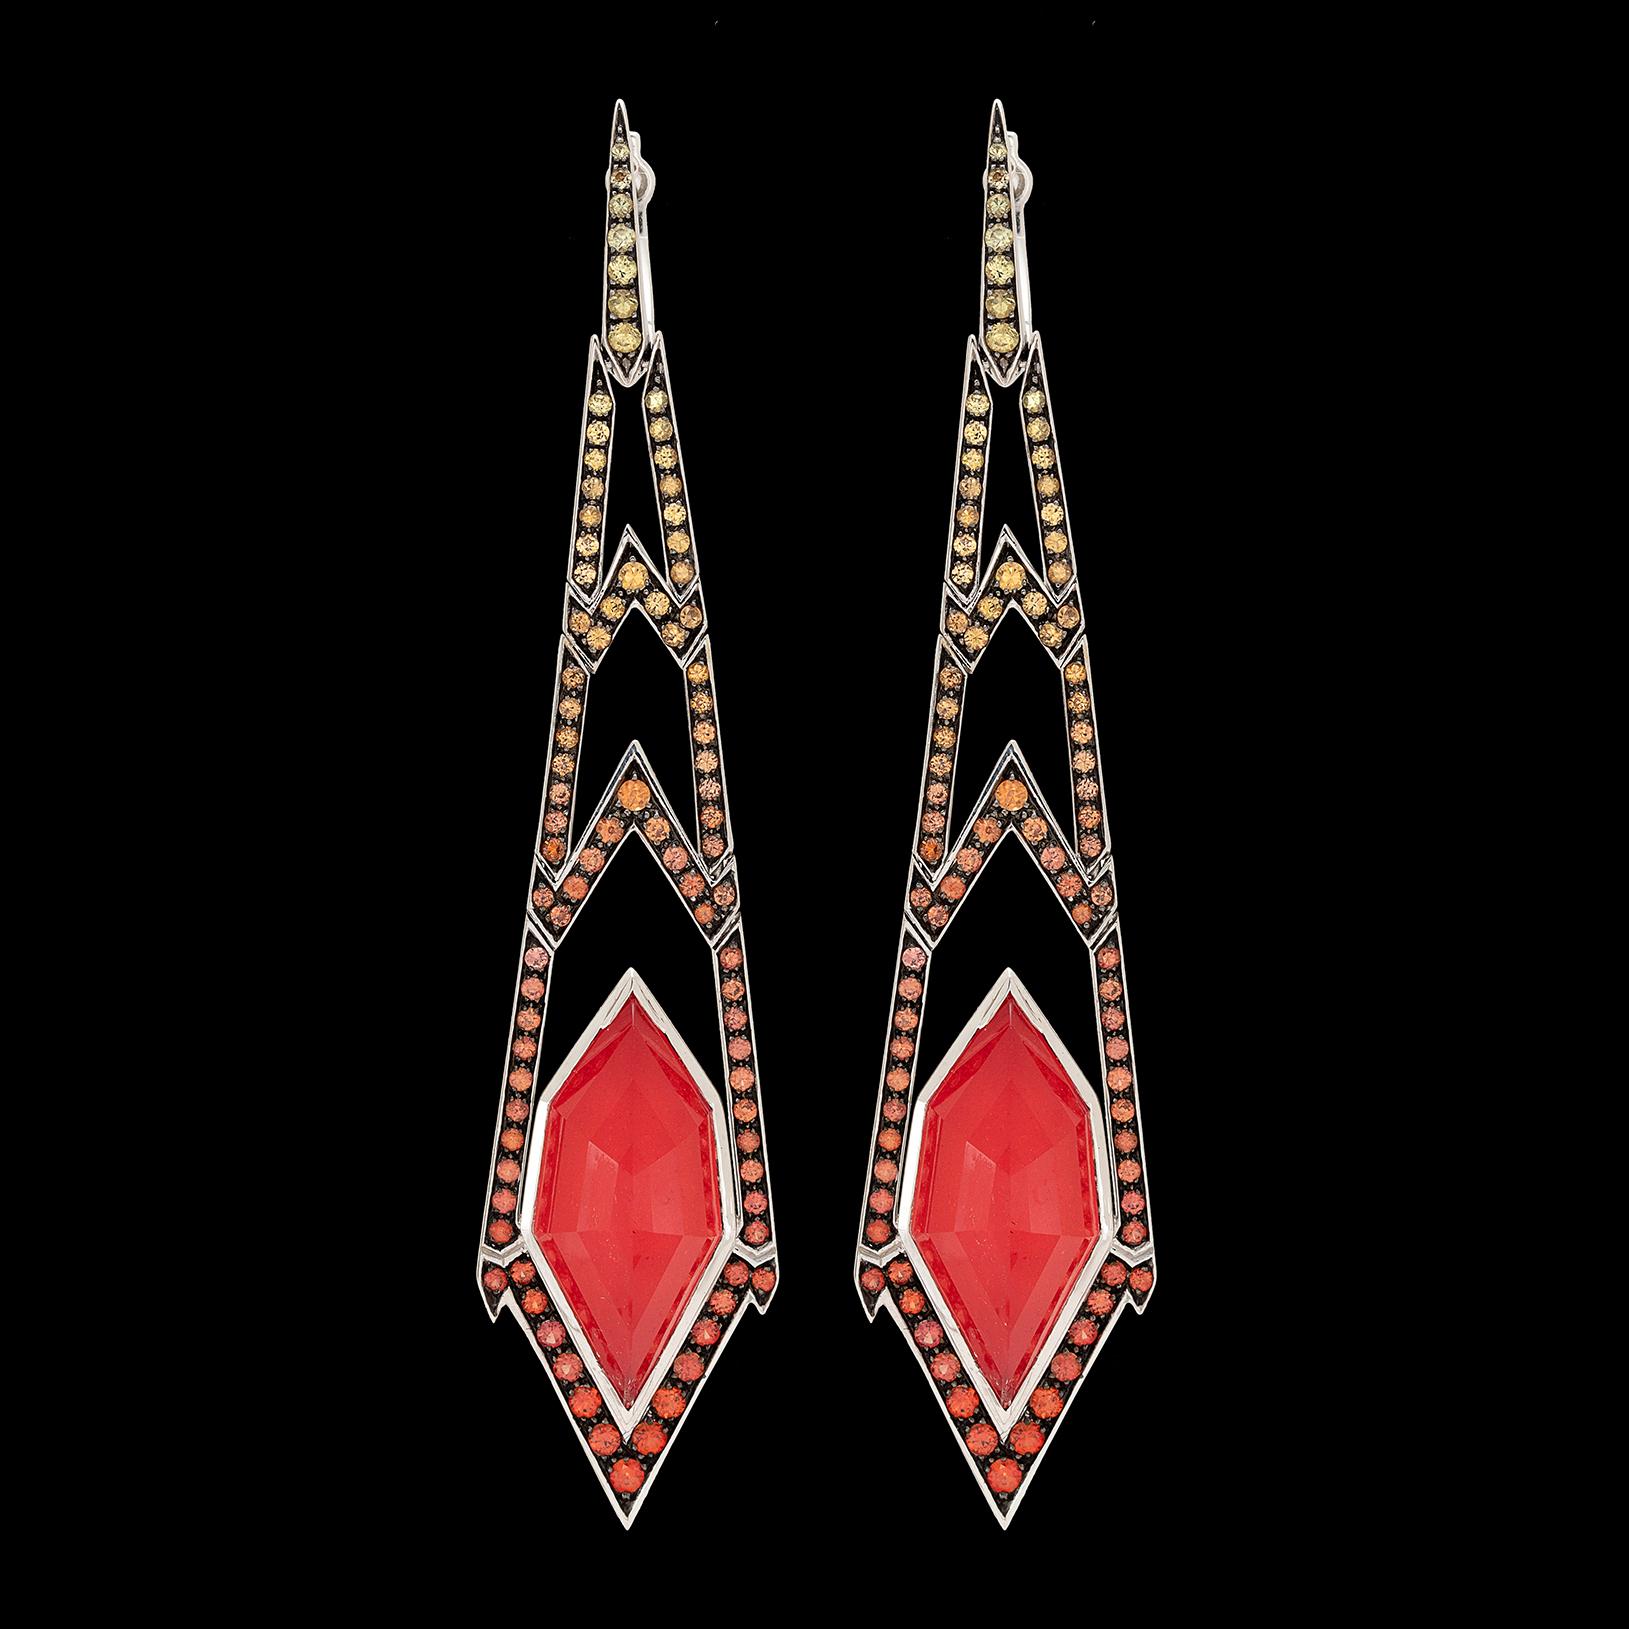 The colors of fall at their best in these Lady Stardust 18k white gold drop earrings by Stephen Webster. Highlighted by fancy-cut quartz over red coral, with yellow to orange sapphires set throughout. The earrings weigh 18.6 grams and measure 3in.